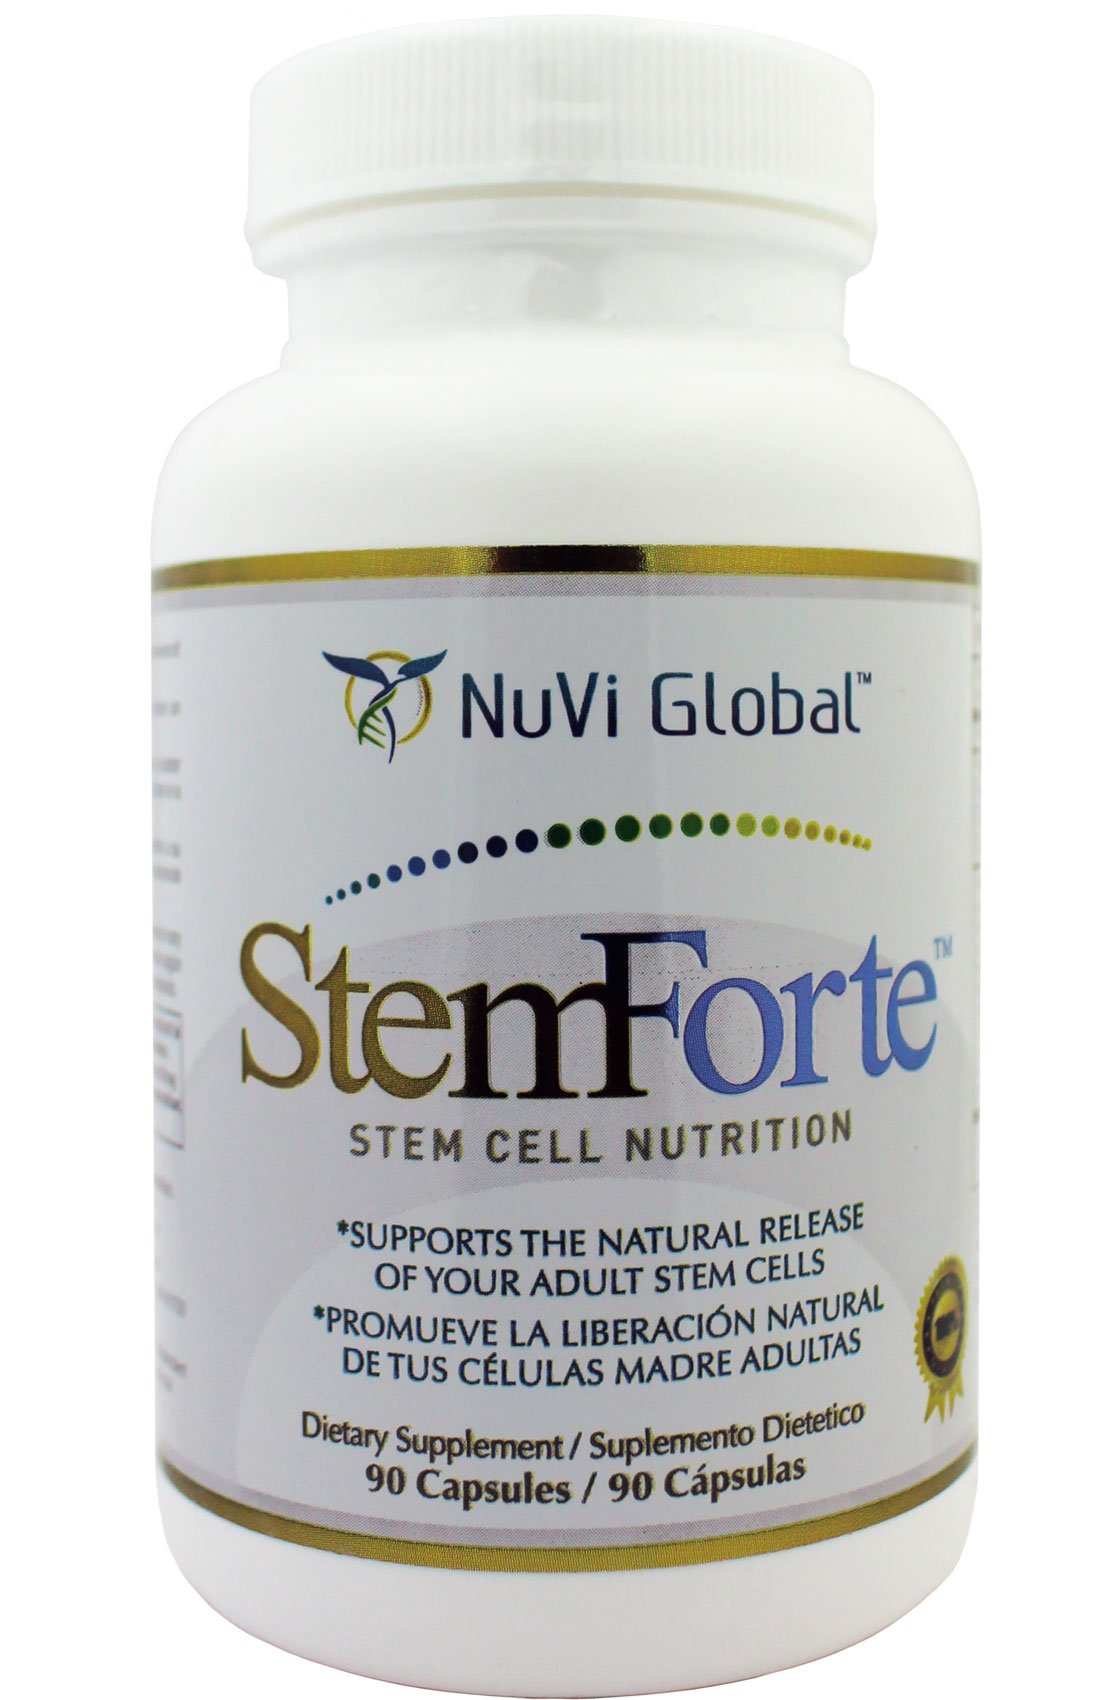 Boosting Your Metabolism and Stem Cell Regeneration: The Power of